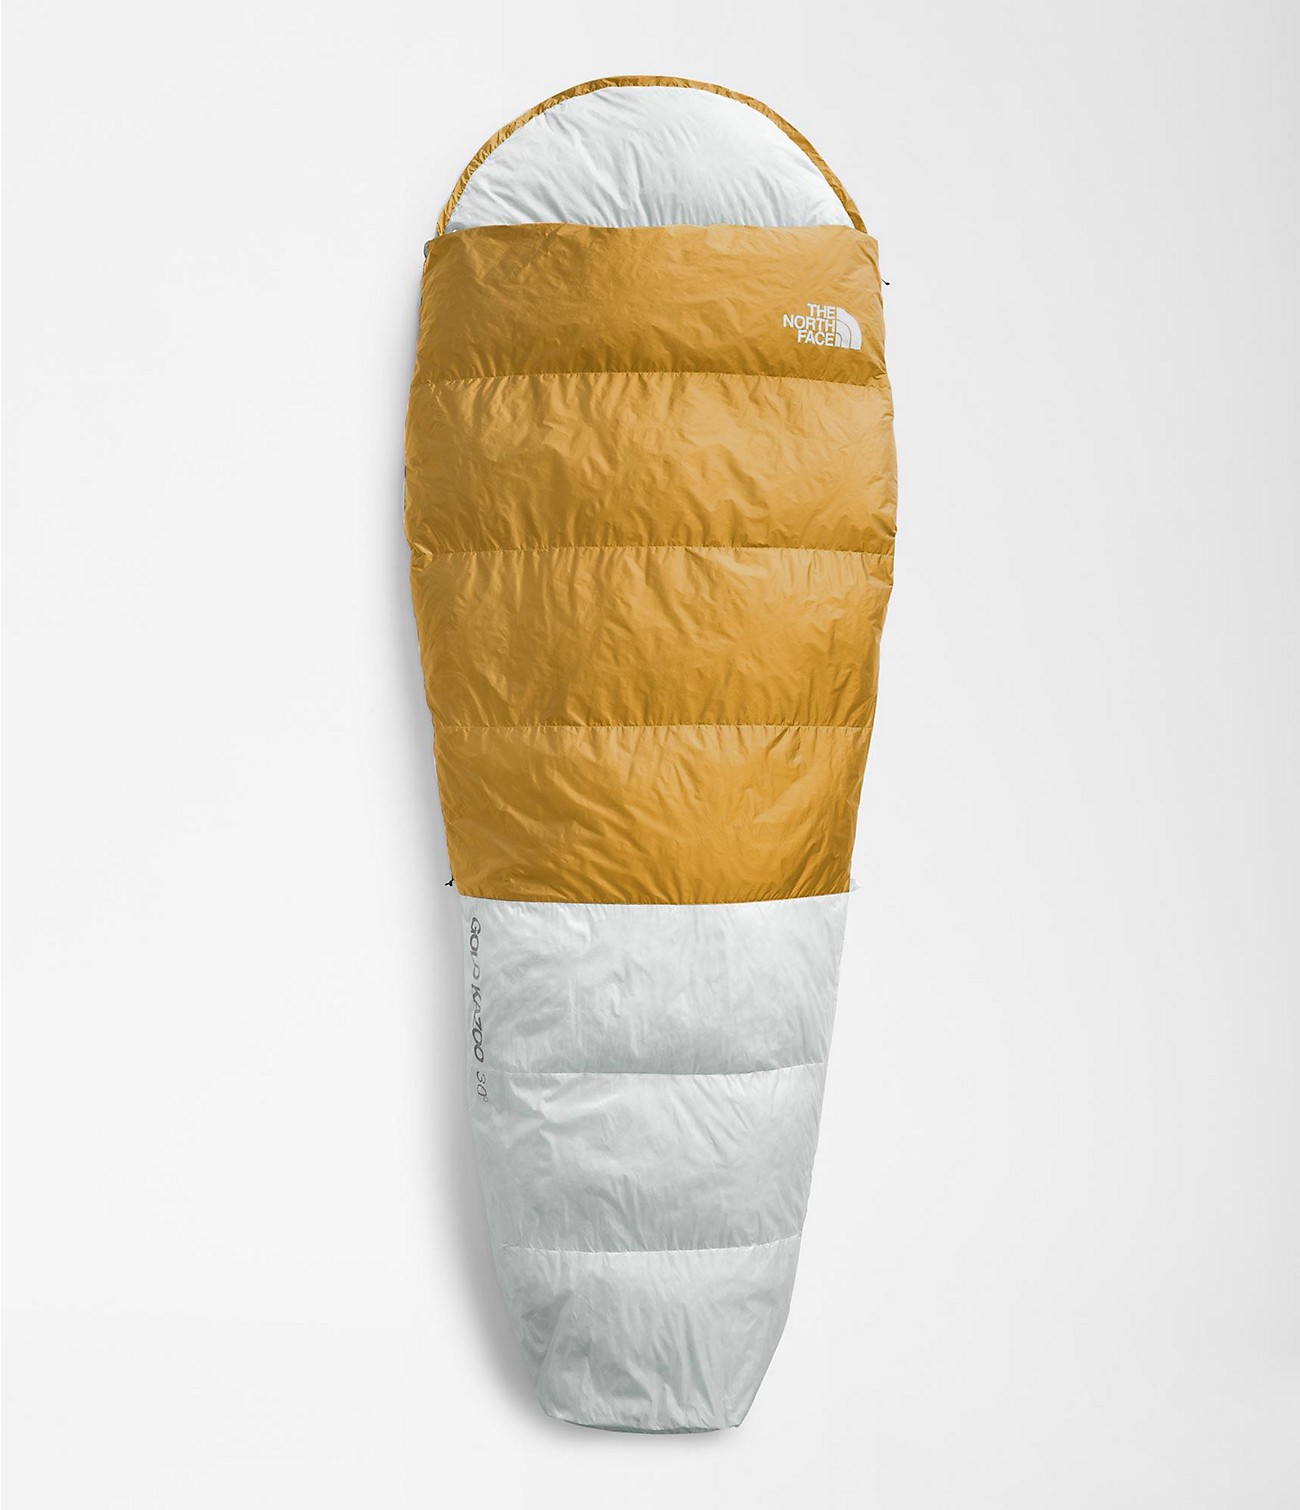 Inferno -40F/-40C Sleeping Bag | The North Face